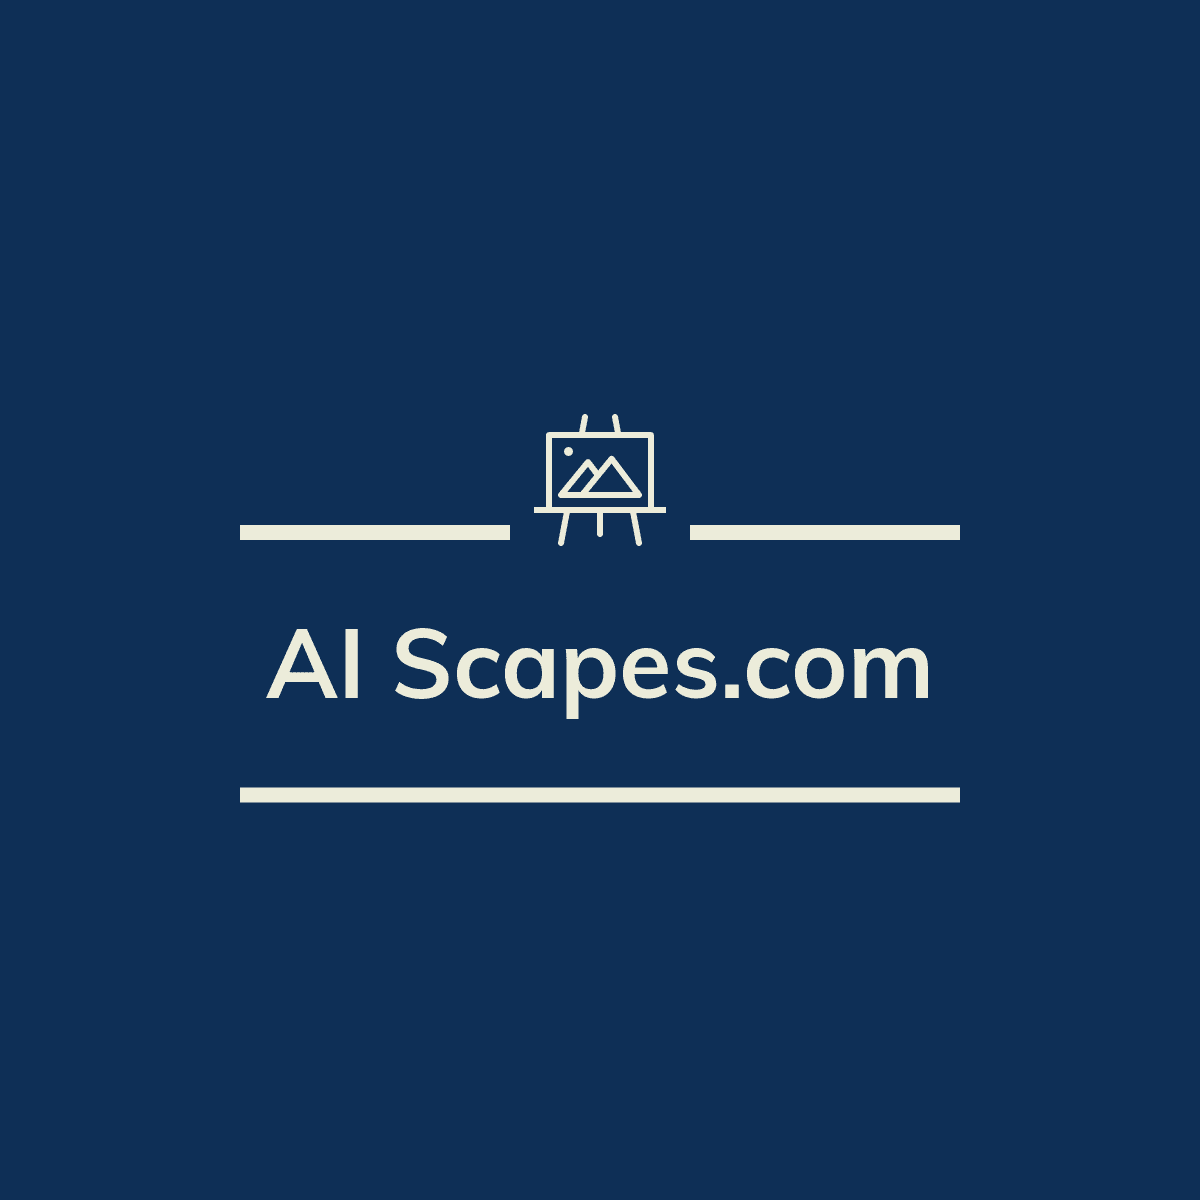 ArtScapes coupons logo